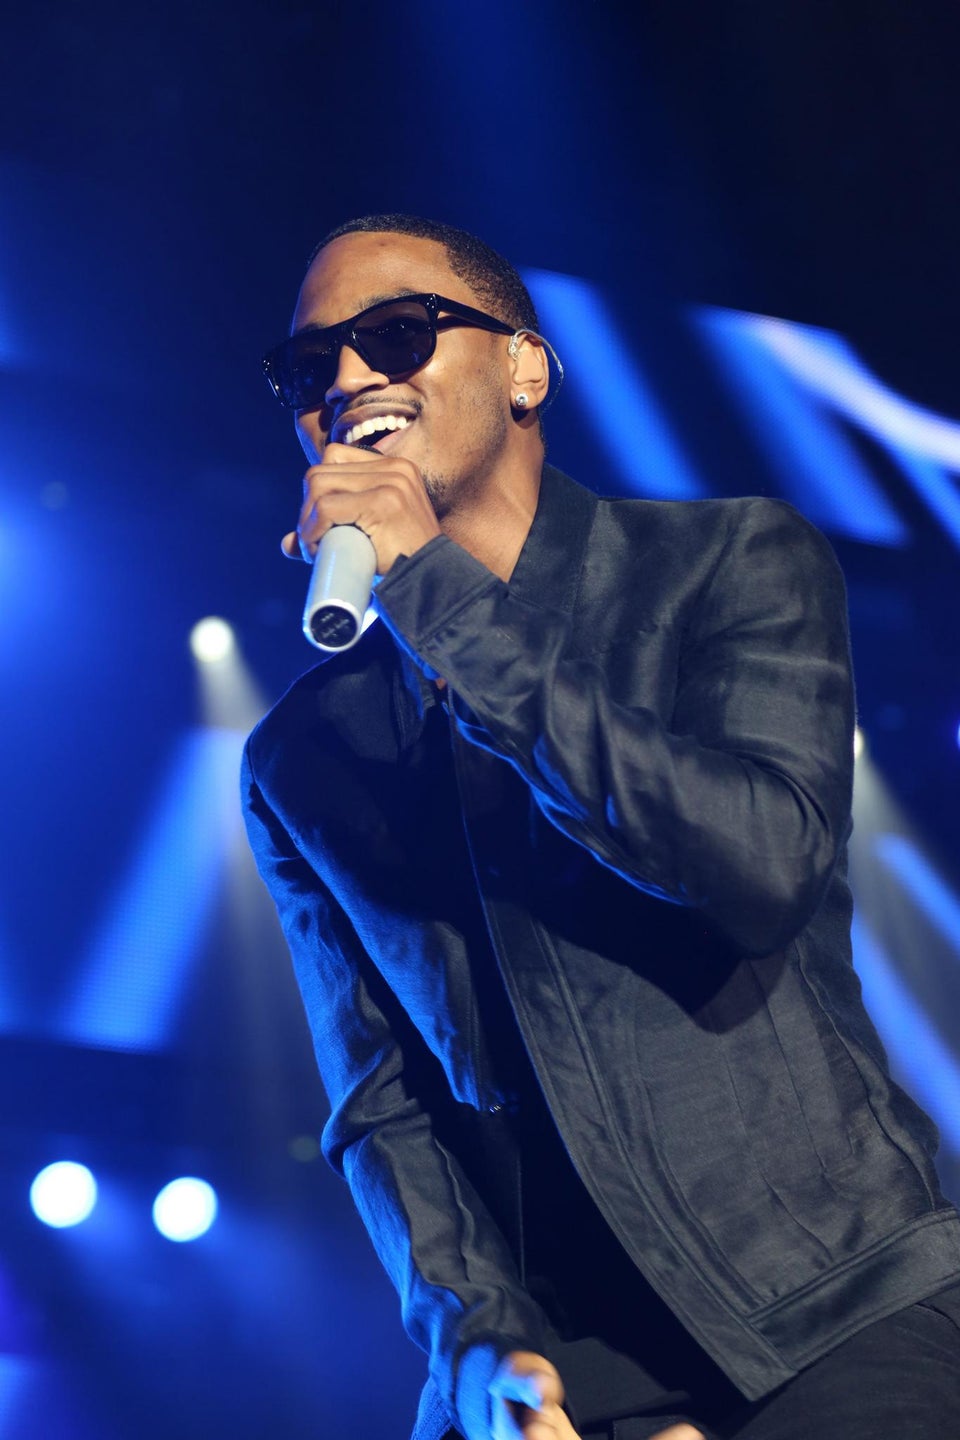 Whoa! Trey Songz Arrested After Concert Outburst, Charged With Assaulting Cop